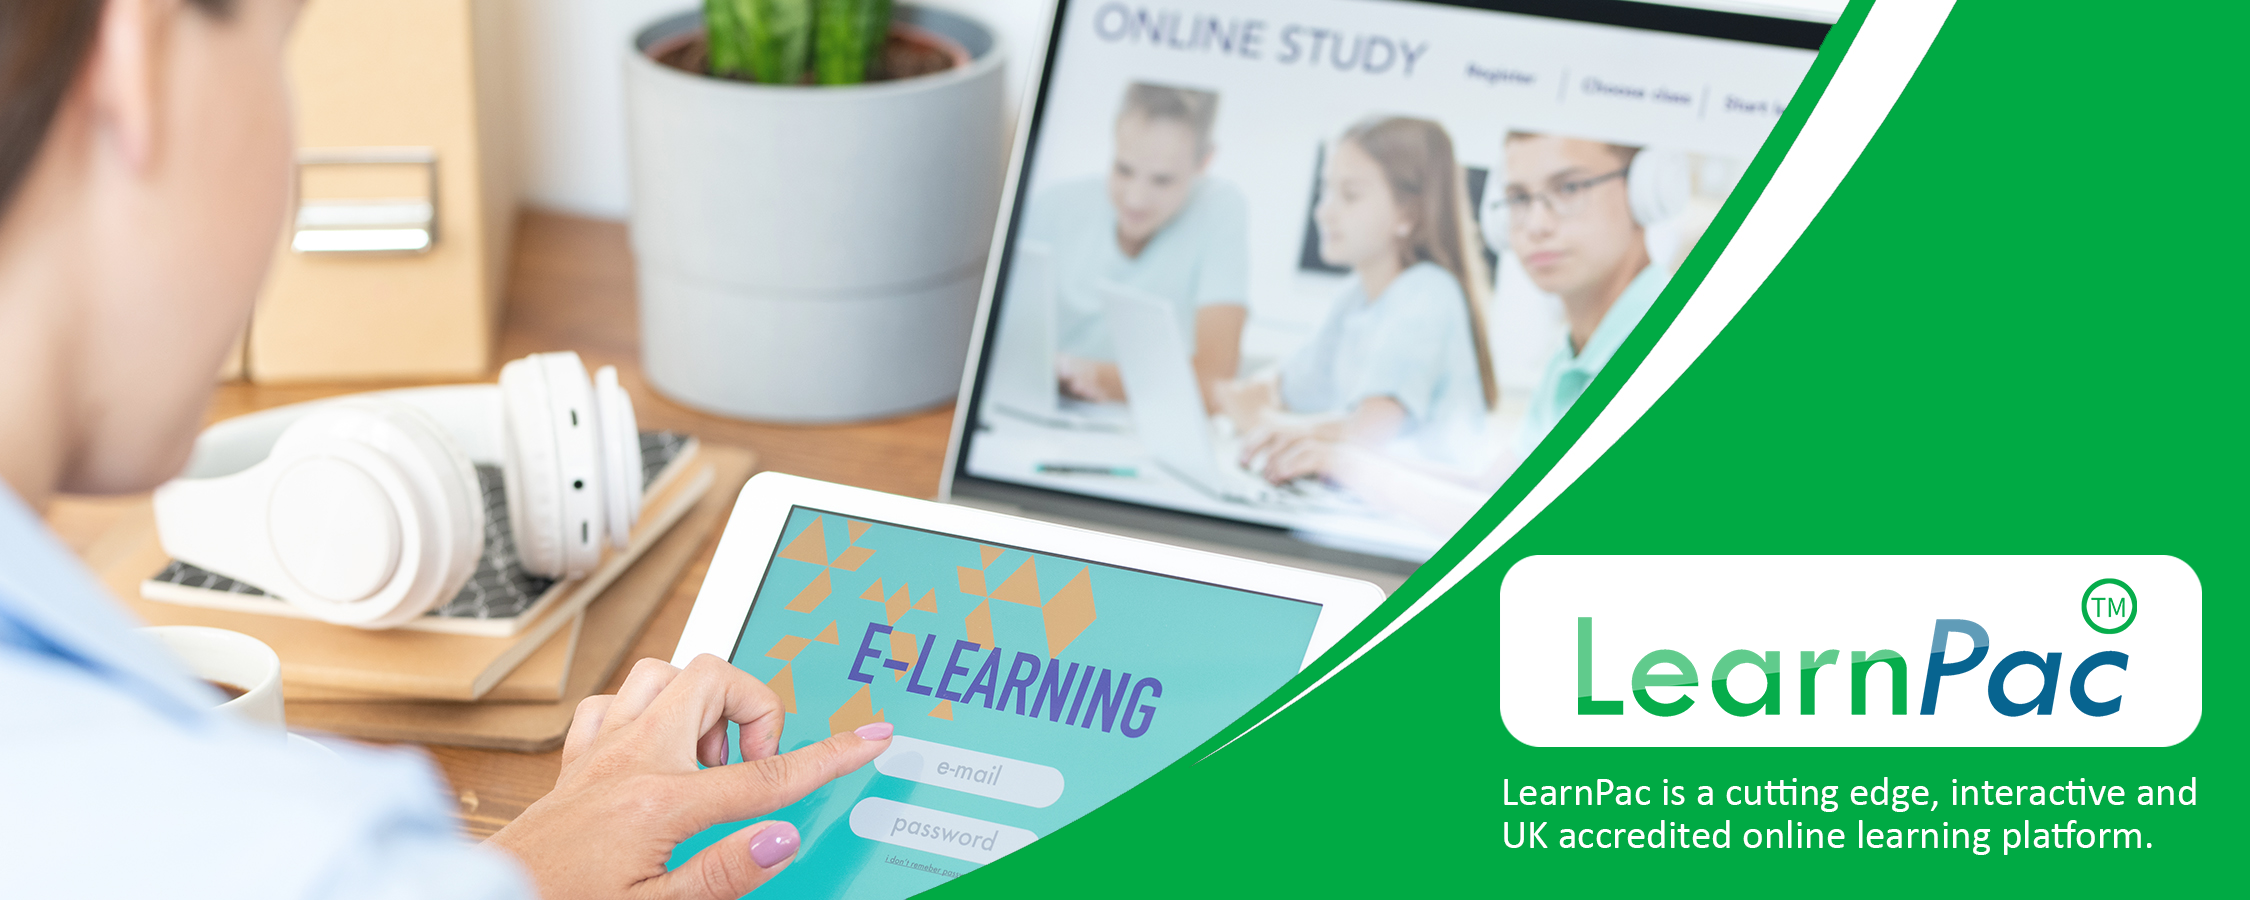 Facilitating Learning in Groups - Online Learning Courses - E-Learning Courses - LearnPac Systems UK -